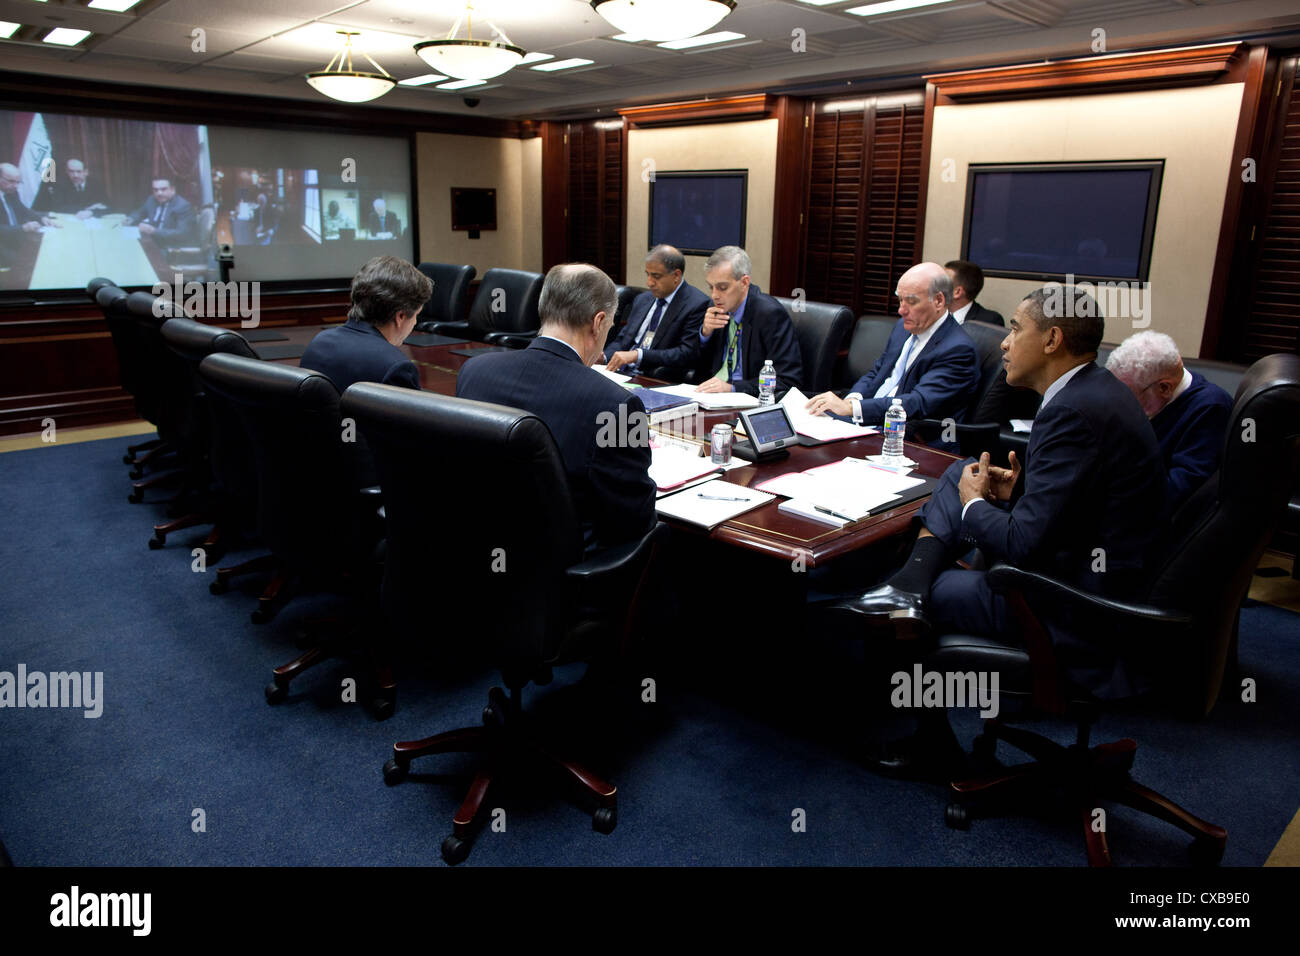 US President Barack Obama talks with Iraqi Prime Minister Nouri al-Maliki during a secure video teleconference October 21, 2011 in the Situation Room of the White House. Seated at the table, from left, are: Tony Blinken, National Security Advisor to the Vice President ; National Security Advisor Tom Donilon; Puneet Talwar, Senior Director for Iraq, Iran and the Gulf States; Deputy National Security Advisor Denis McDonough; and Chief of Staff Bill Daley. Pictured on screen, from left, are: Prime Minister al-Maliki, along with two aides; Vice President Joe Biden; and General Lloyd Austin, Comman Stock Photo